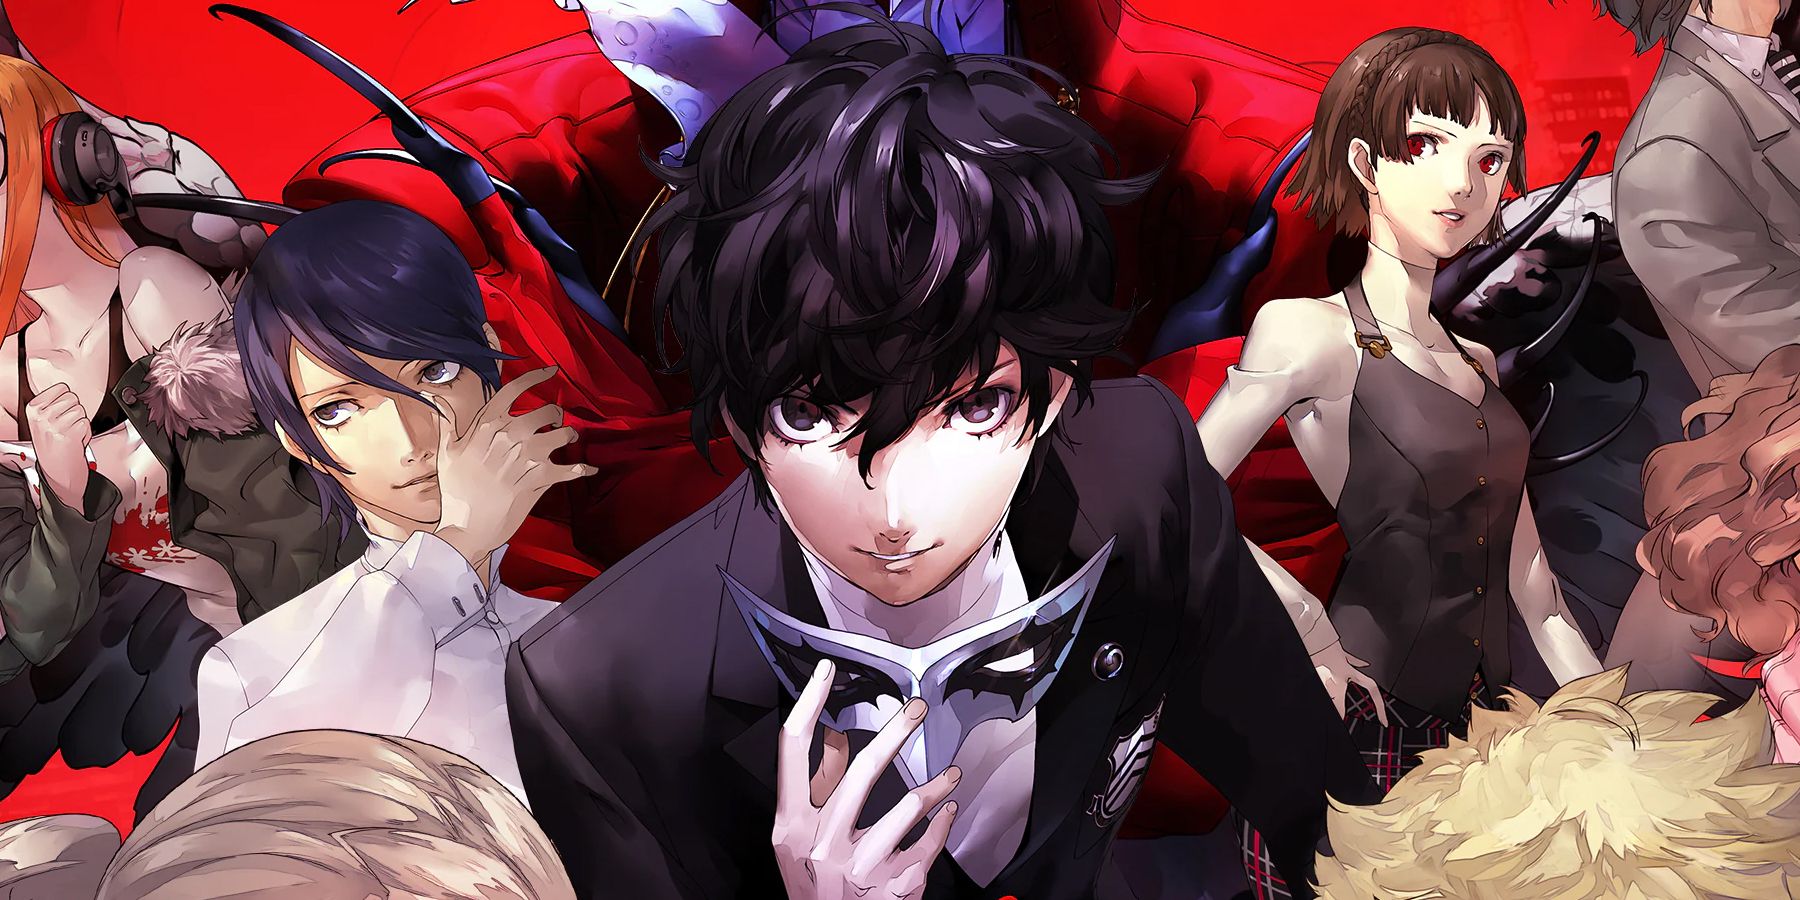 A cover image of the main characters of Persona 5.